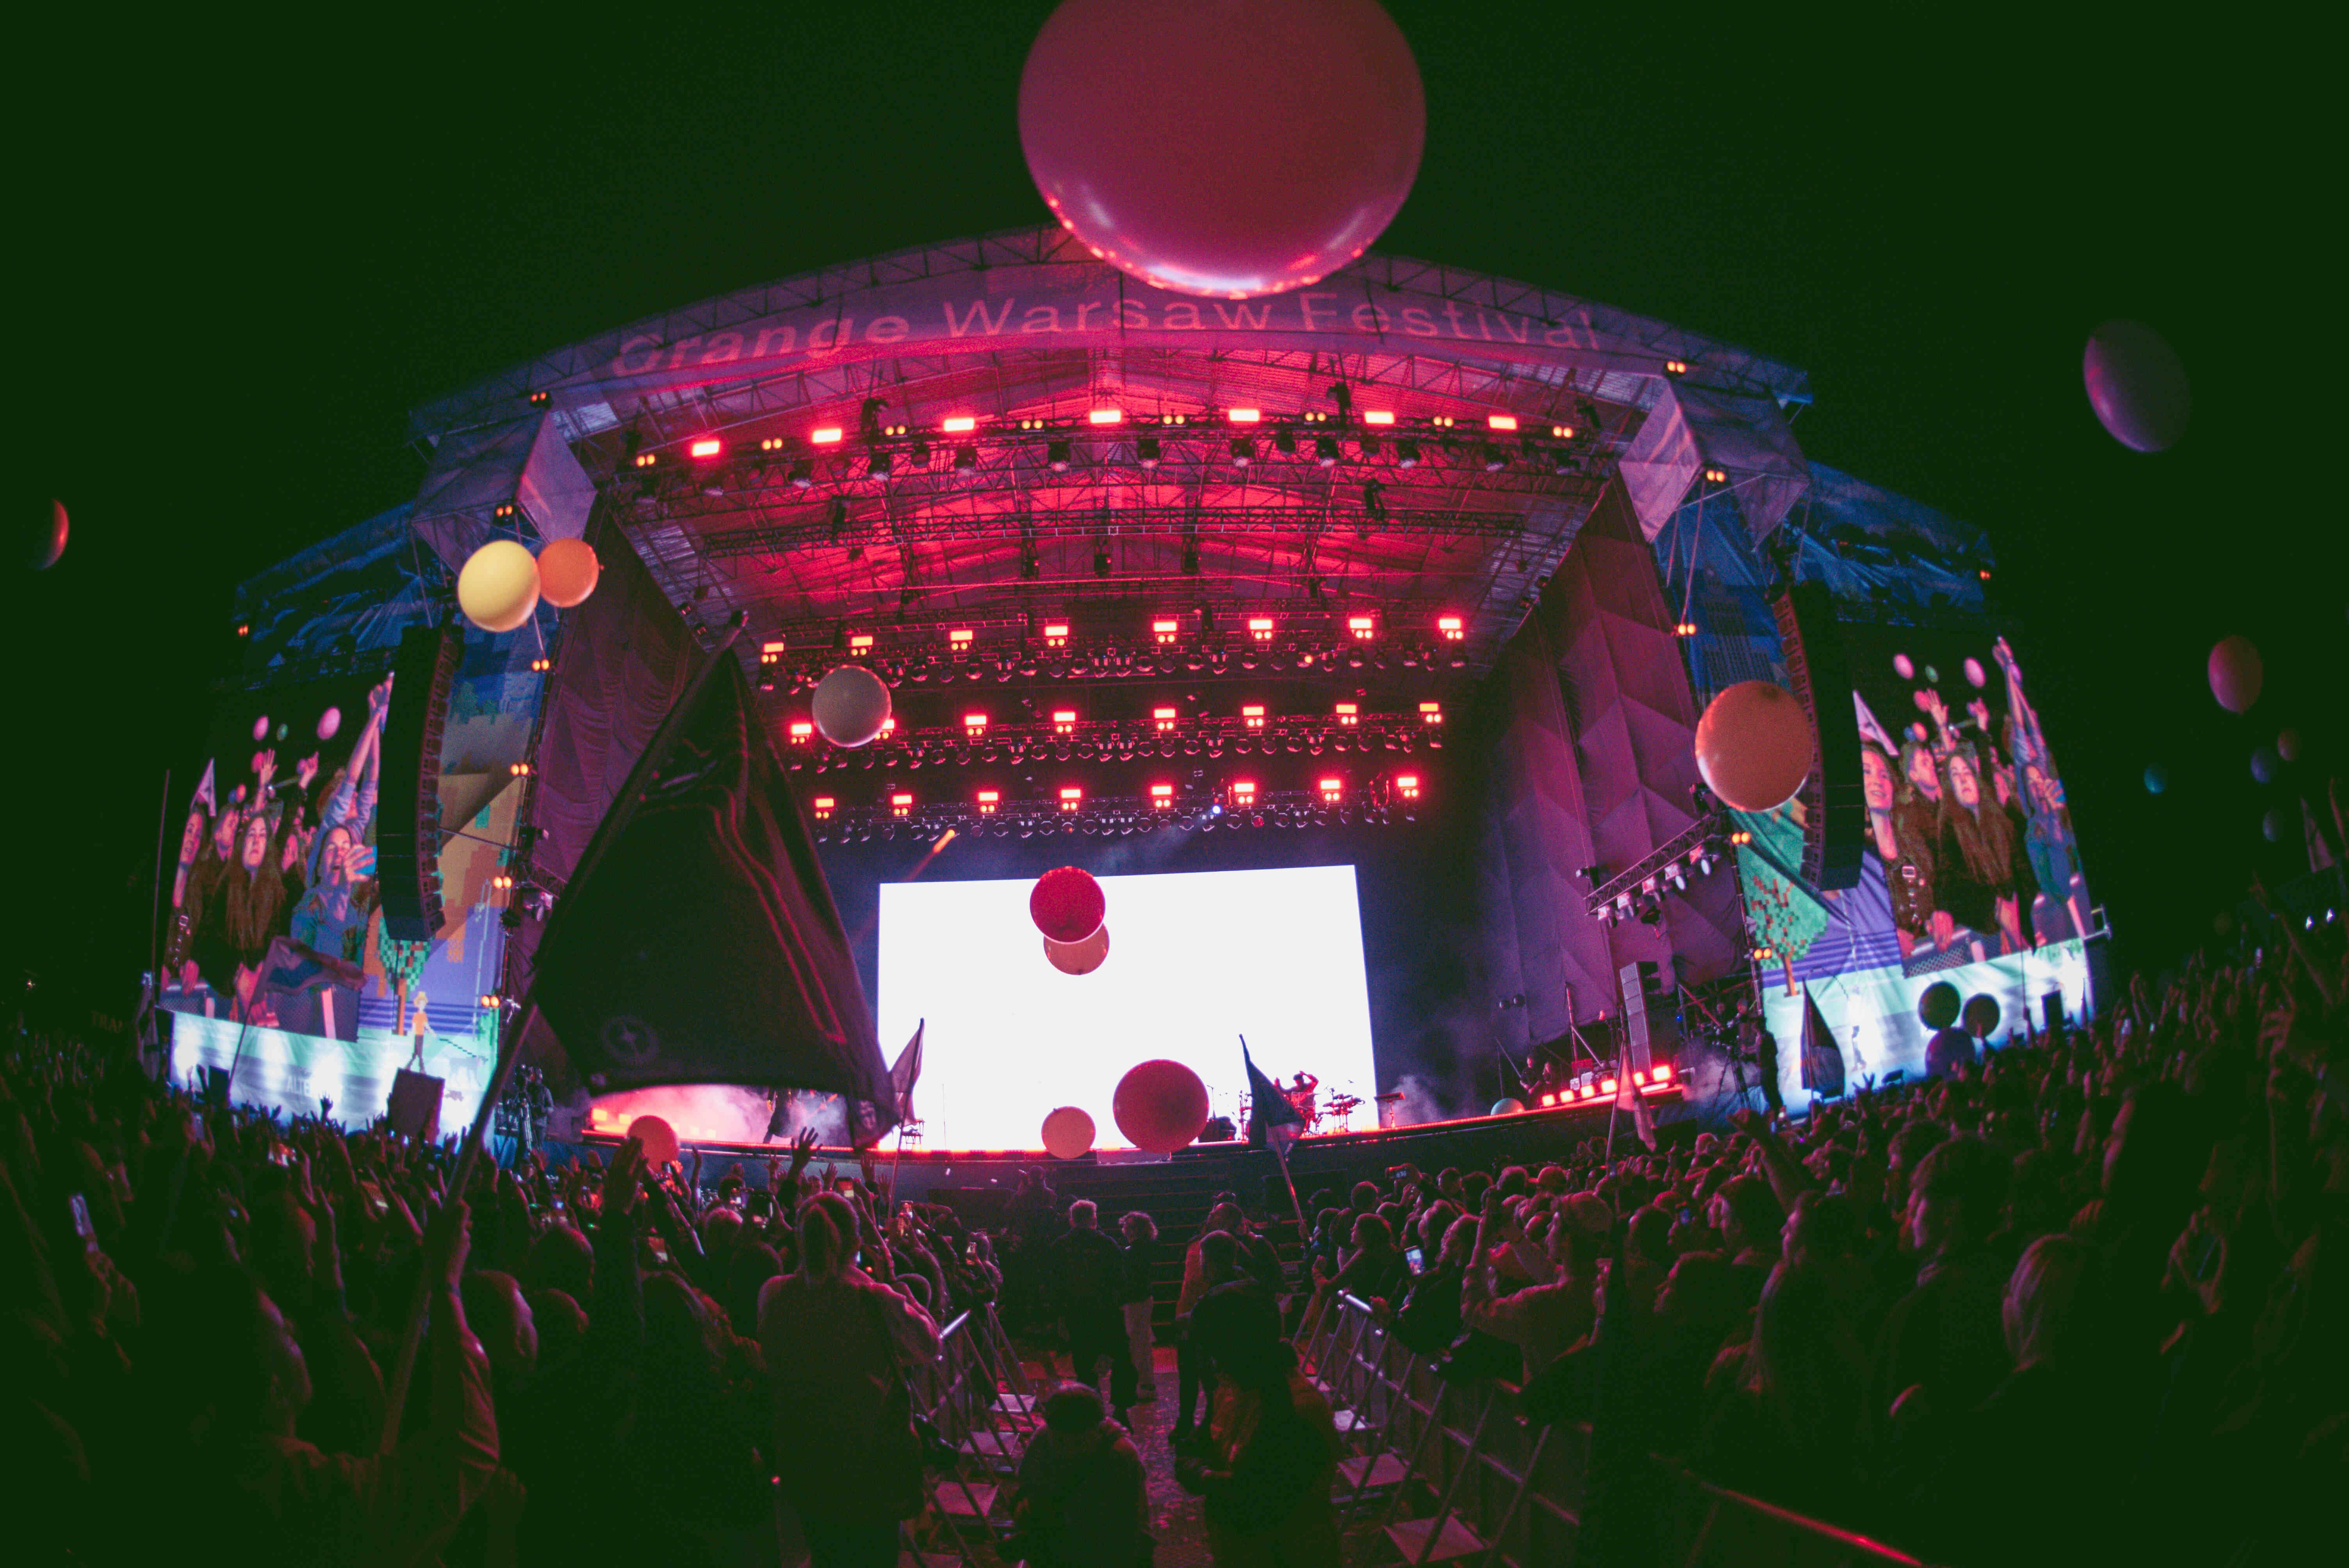 Balloons during the Thirty Seconds To Mars concert at Orange Warsaw Festival 2023